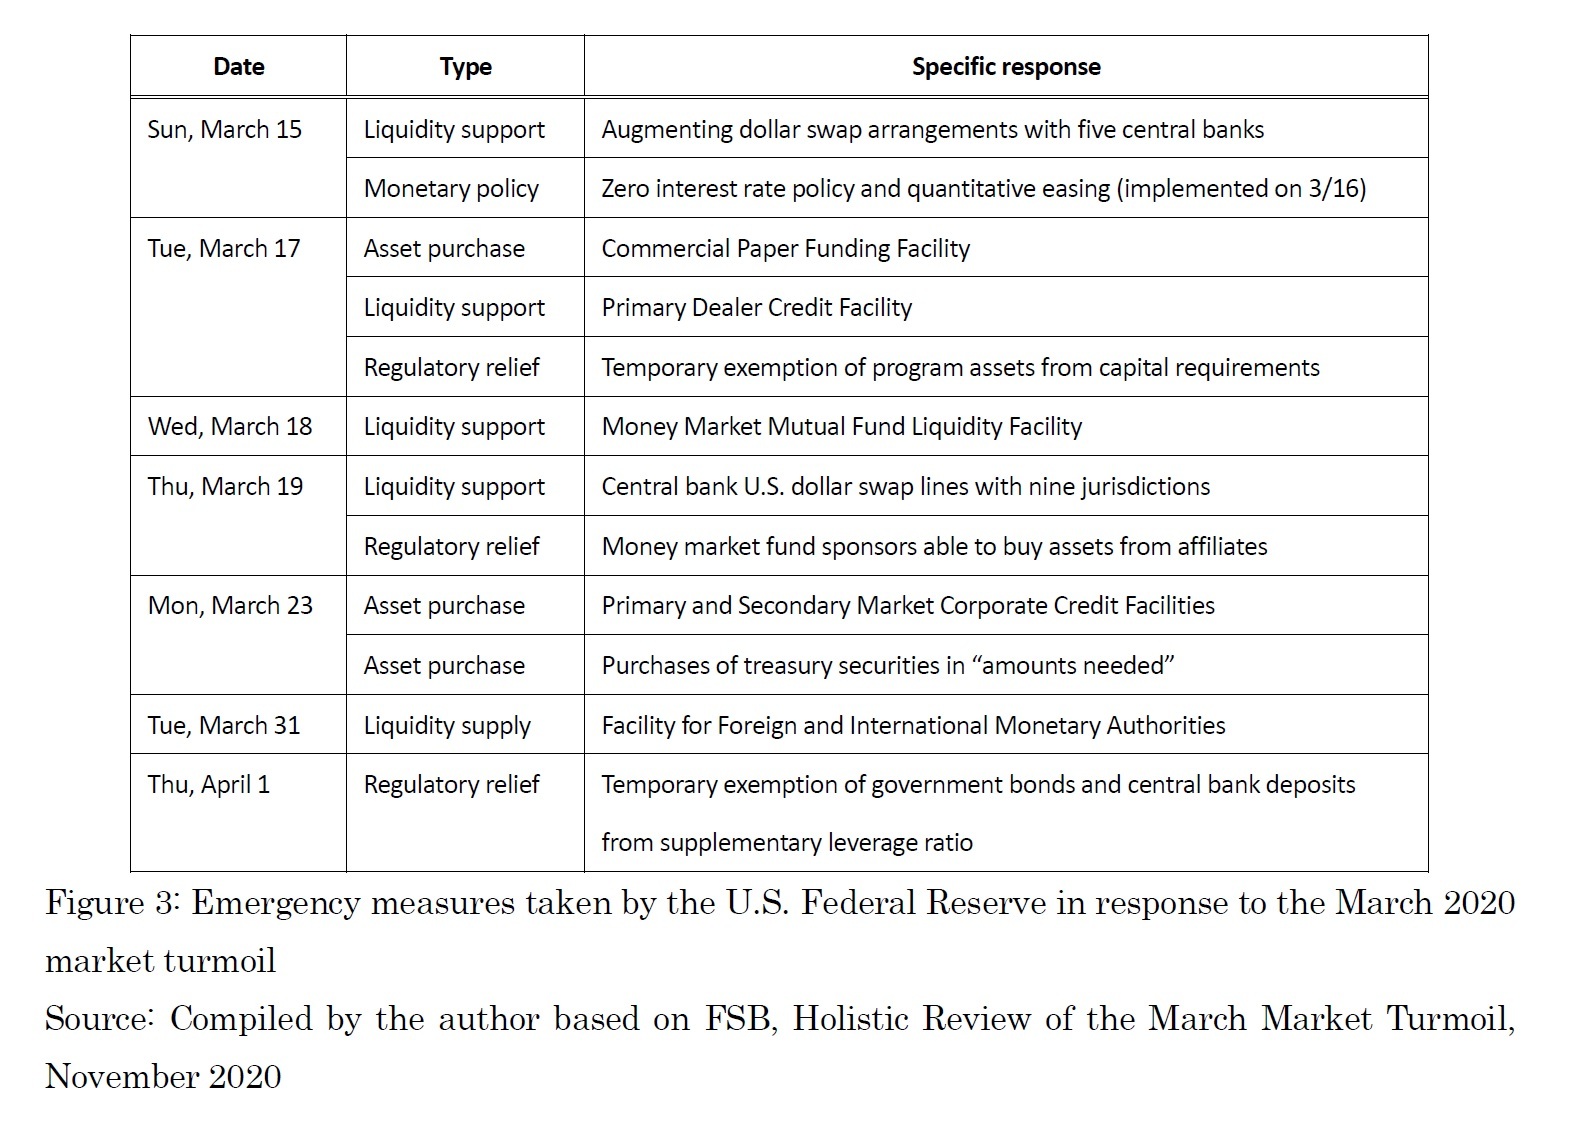 Figure 3: Emergency measures taken by the U.S. Federal Reserve in response to the March 2020 market turmoil